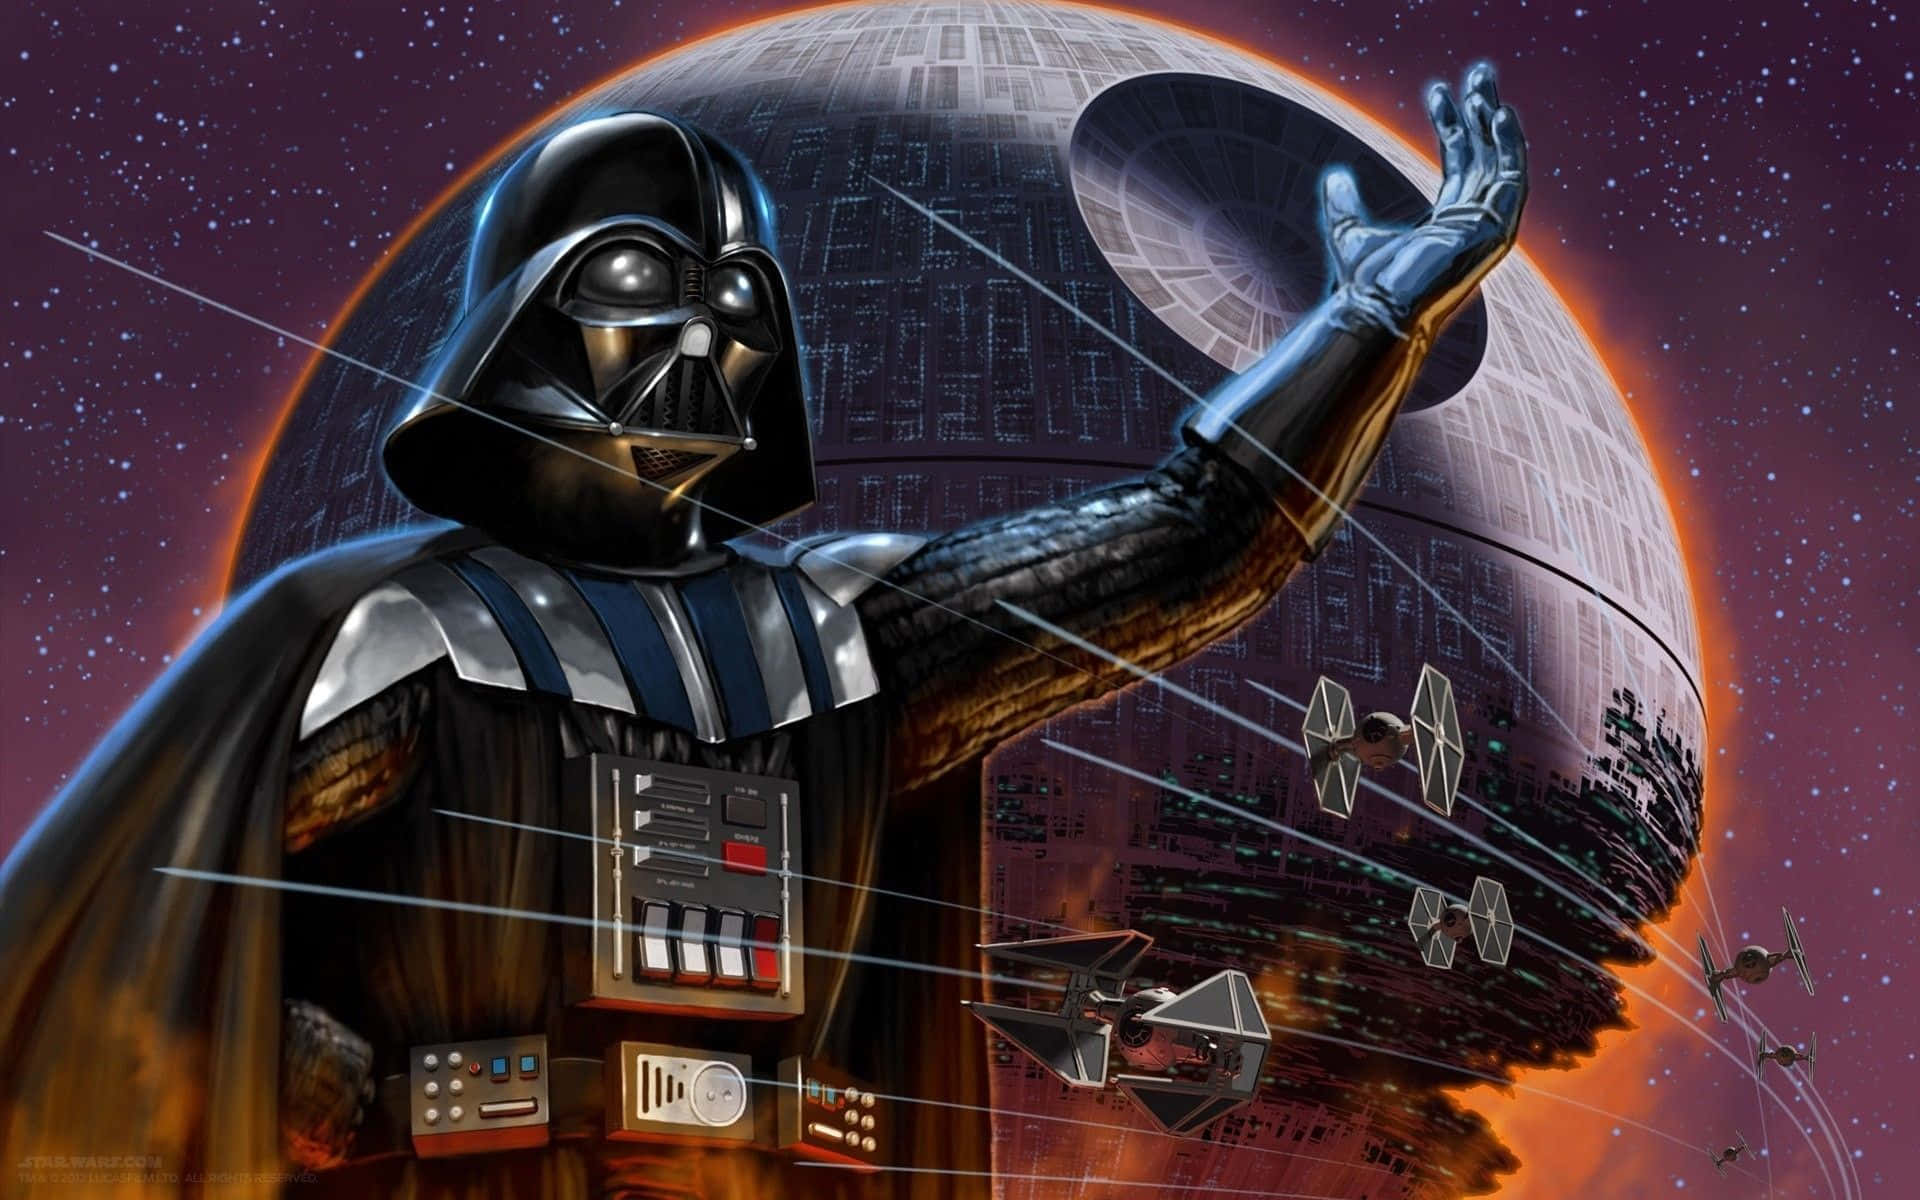 Join the Empire and make your mark with the iconic Death Star